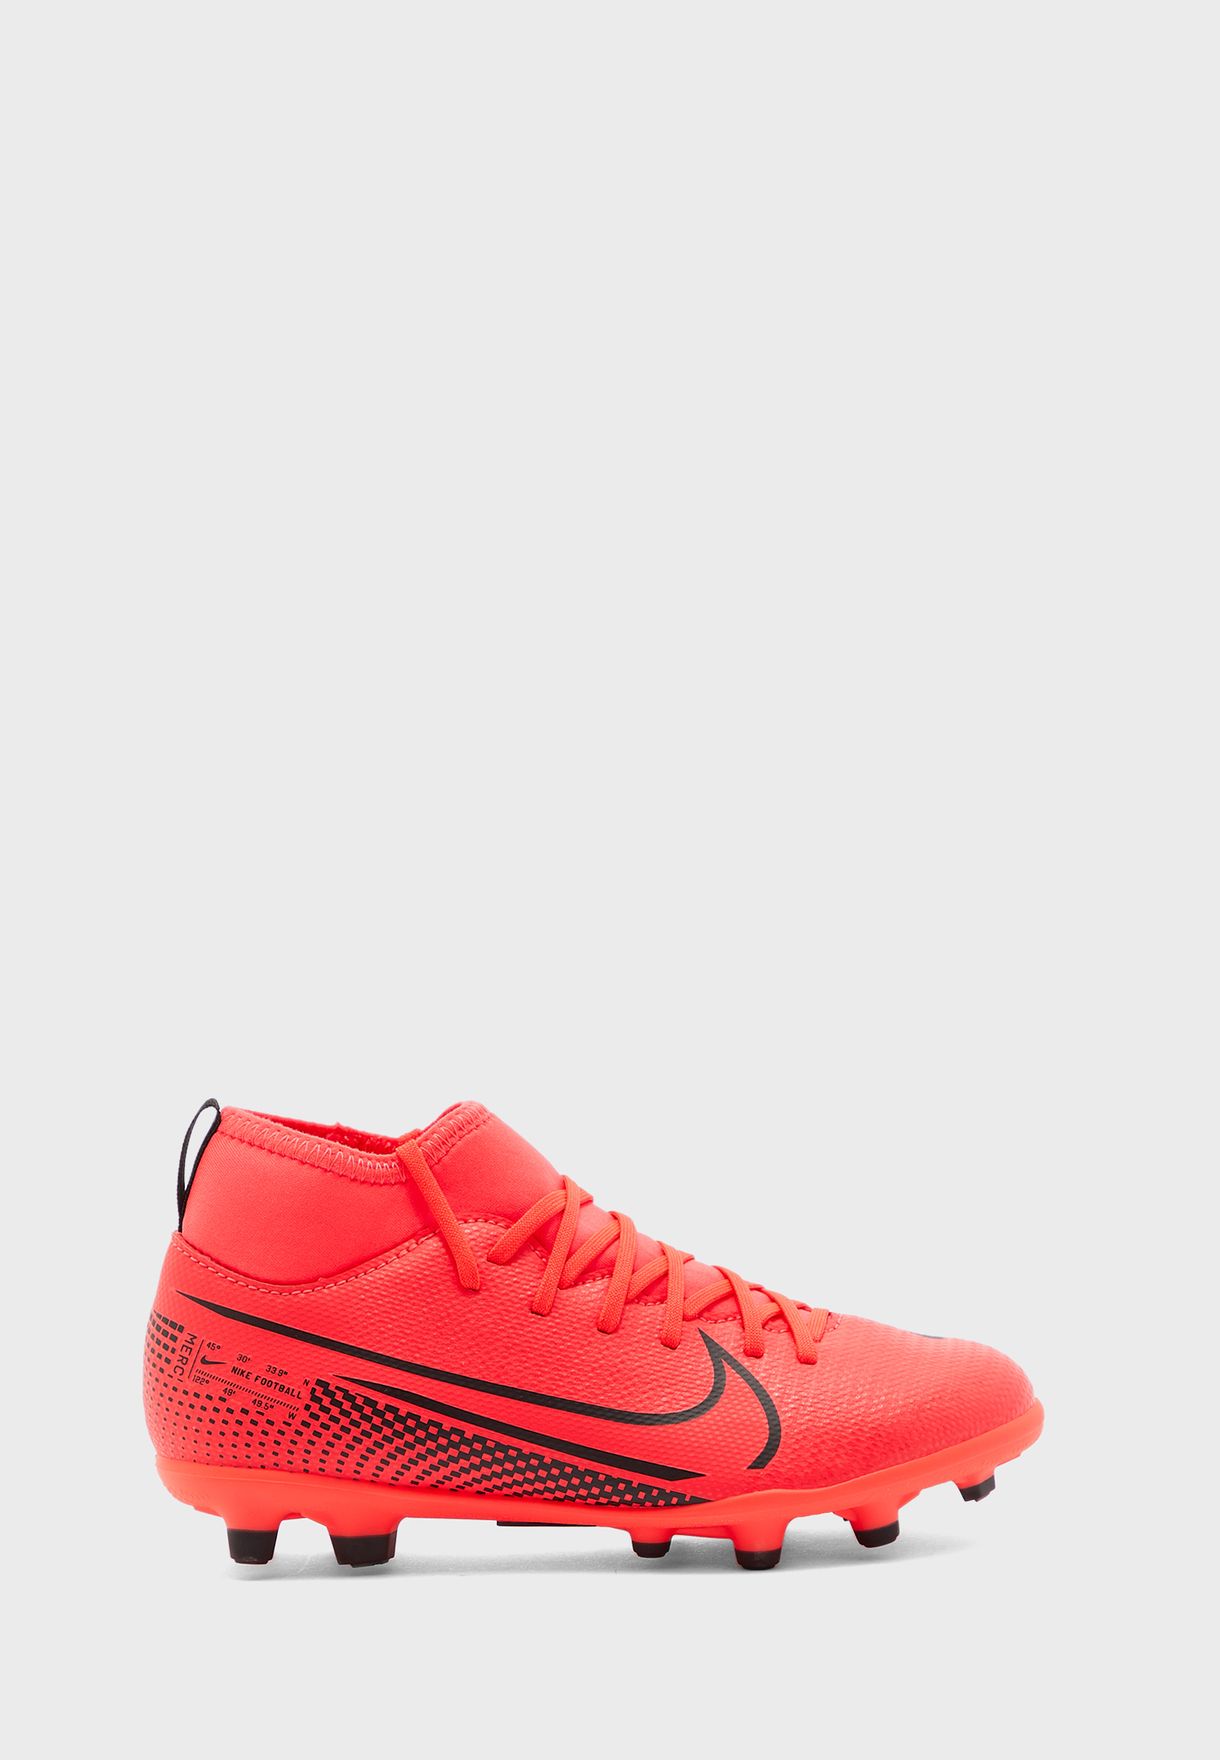 Scarpe calcetto Nike Mercurial Superfly 7 Club Turf child.